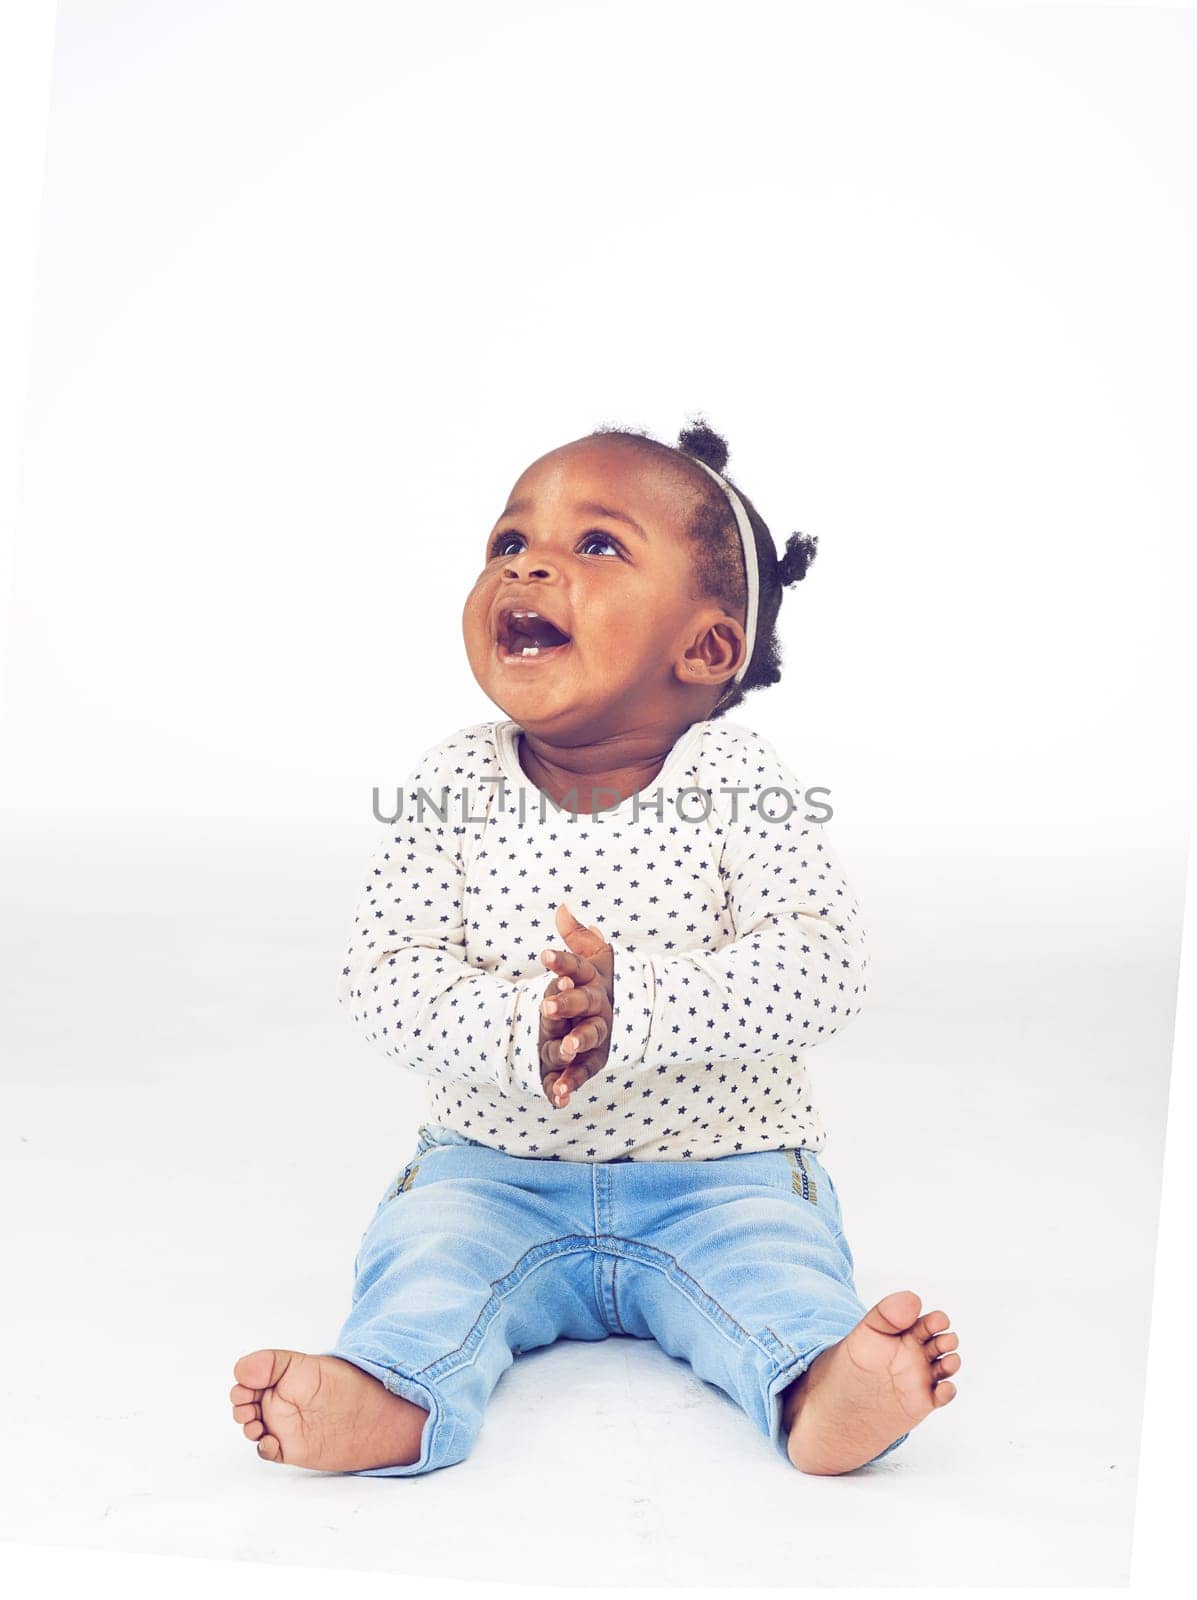 Black baby, girl or excited to relax, laugh or vision for clapping, funny or idea on white background. Toddler, smile or on floor to imagine, curiosity or wonder of childhood on studio mock up.